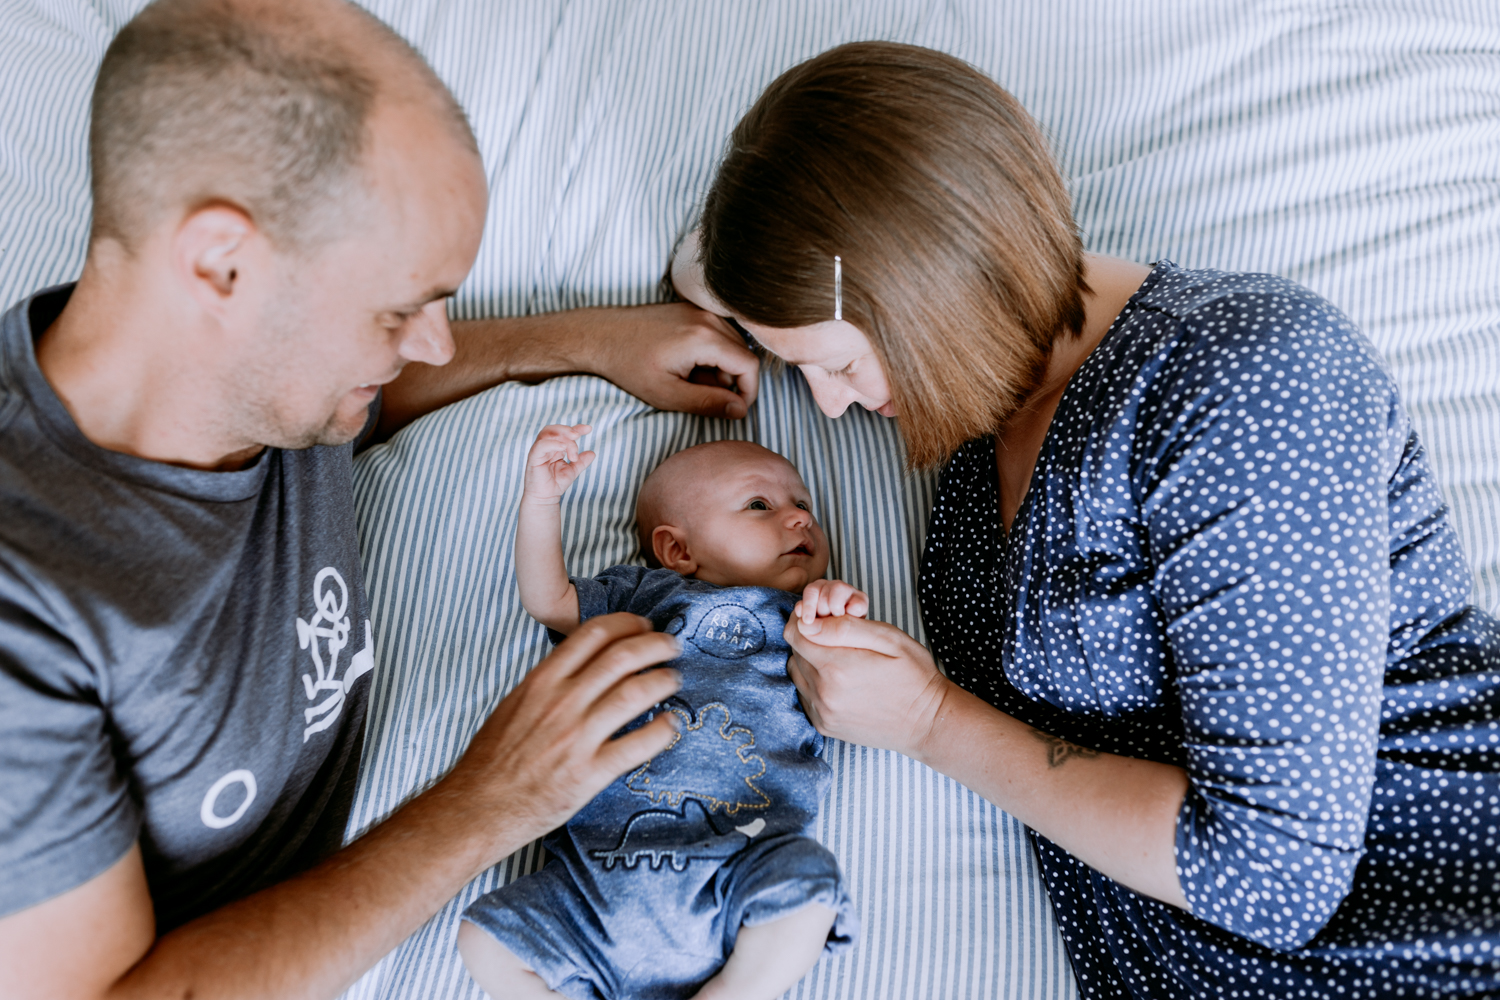 In home lifestyle newborn photo session | Mum and dad and baby on bed | Hampshire newborn photography | Ewa Jones Photography